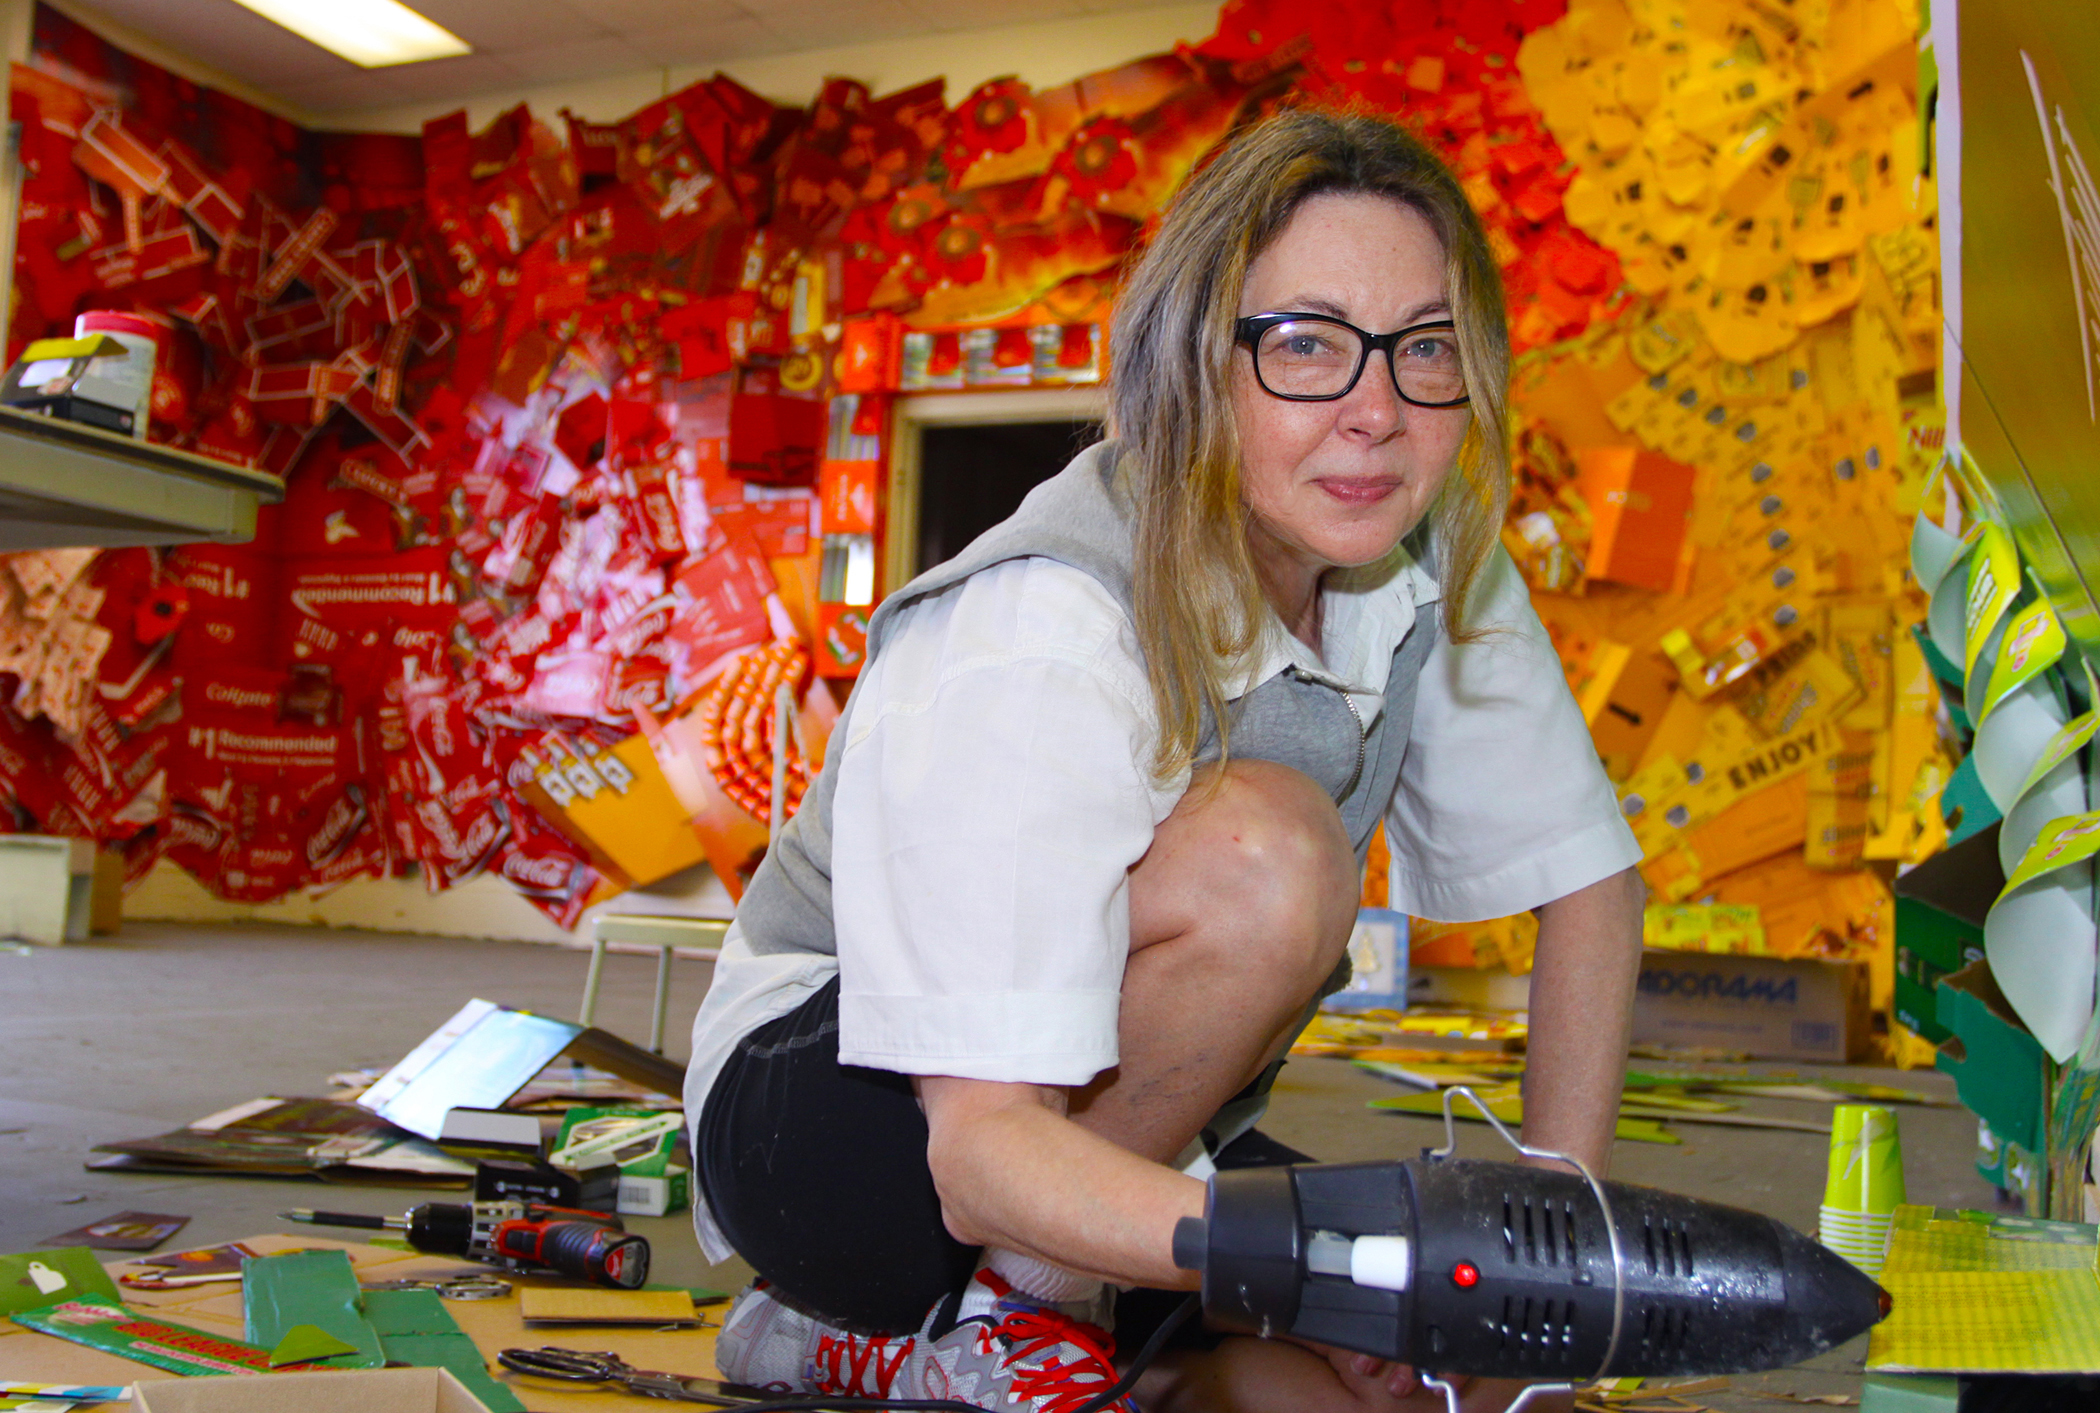 Visiting artist Lisa Hoke at work on her ARTmuse installation at SMOA (Photo Rich Schineller)